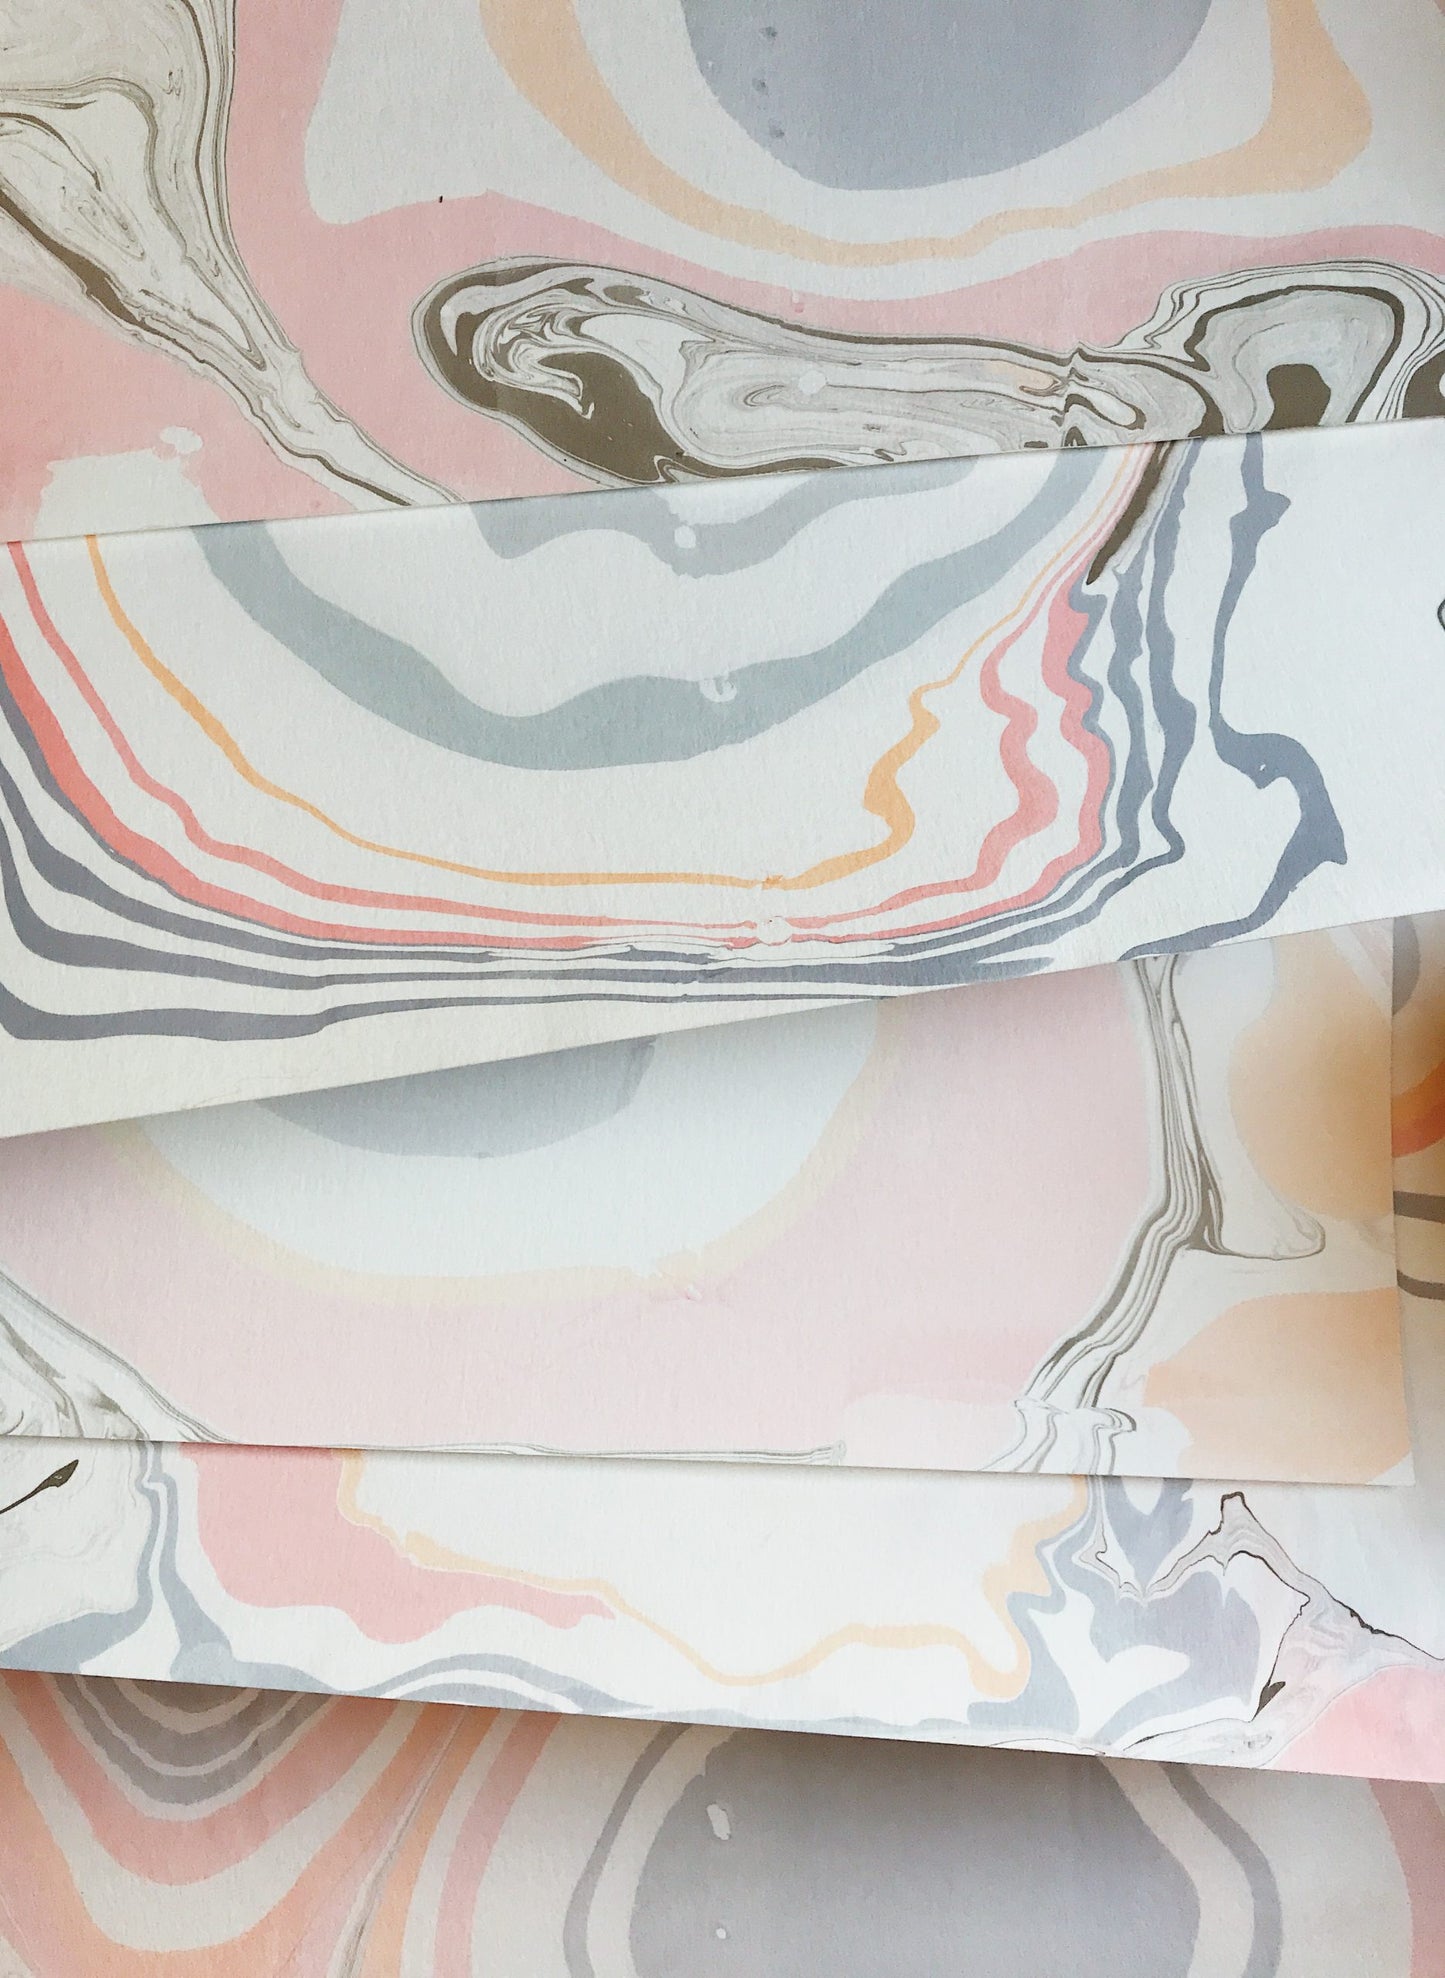 10-21 Suminagashi Paper Marbling with Hayley Ferber